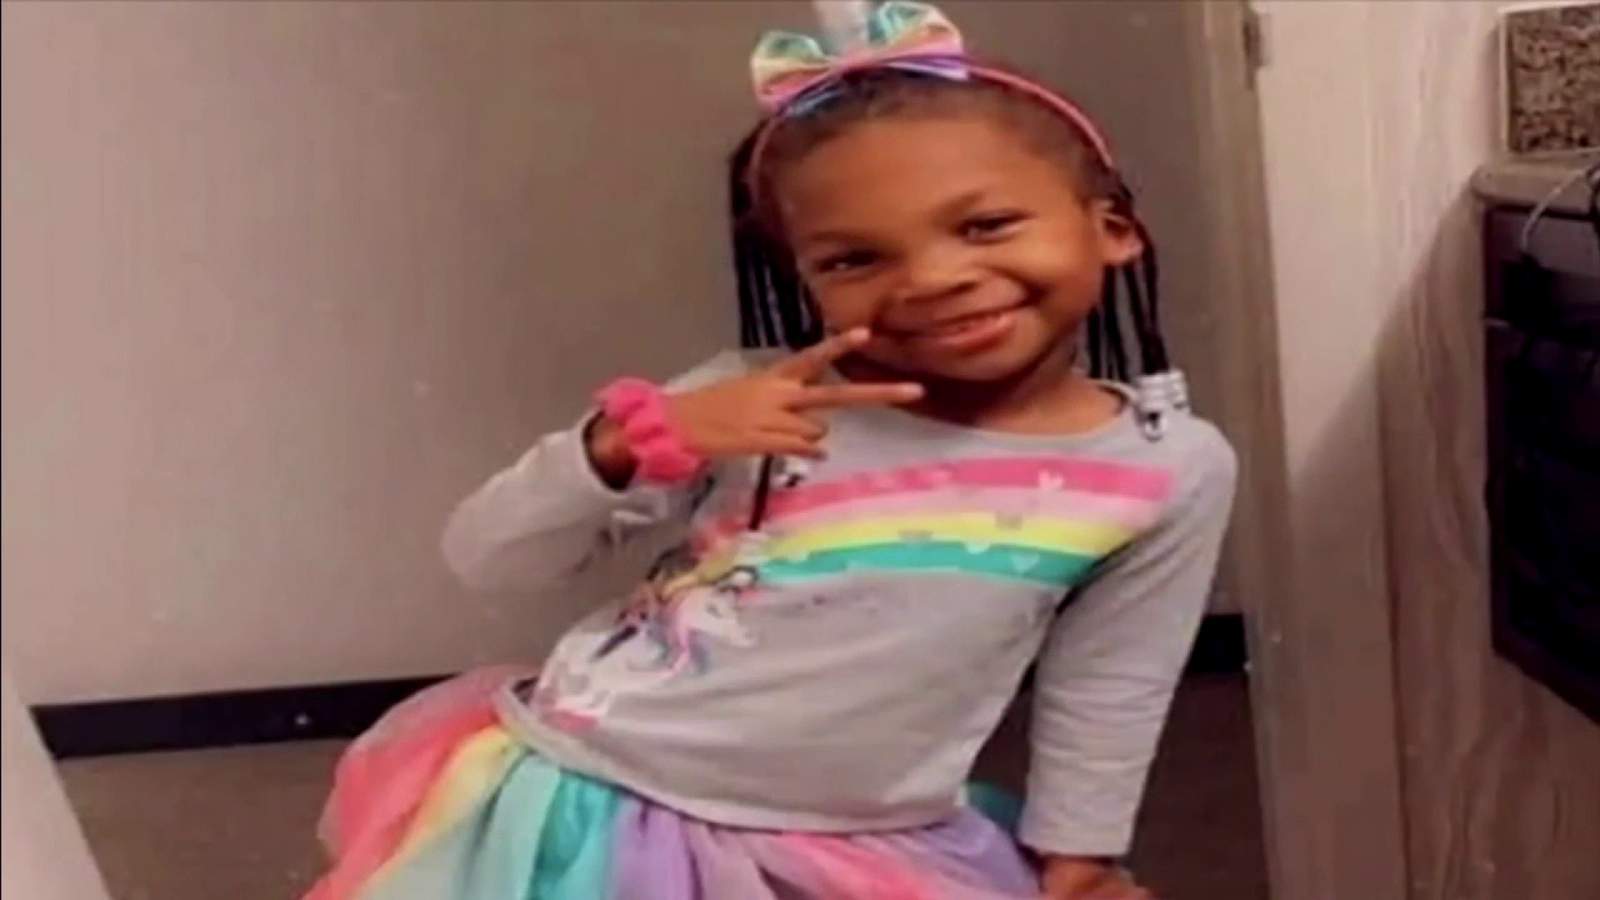 6-year-old girl dies after being shot at toddler’s birthday party